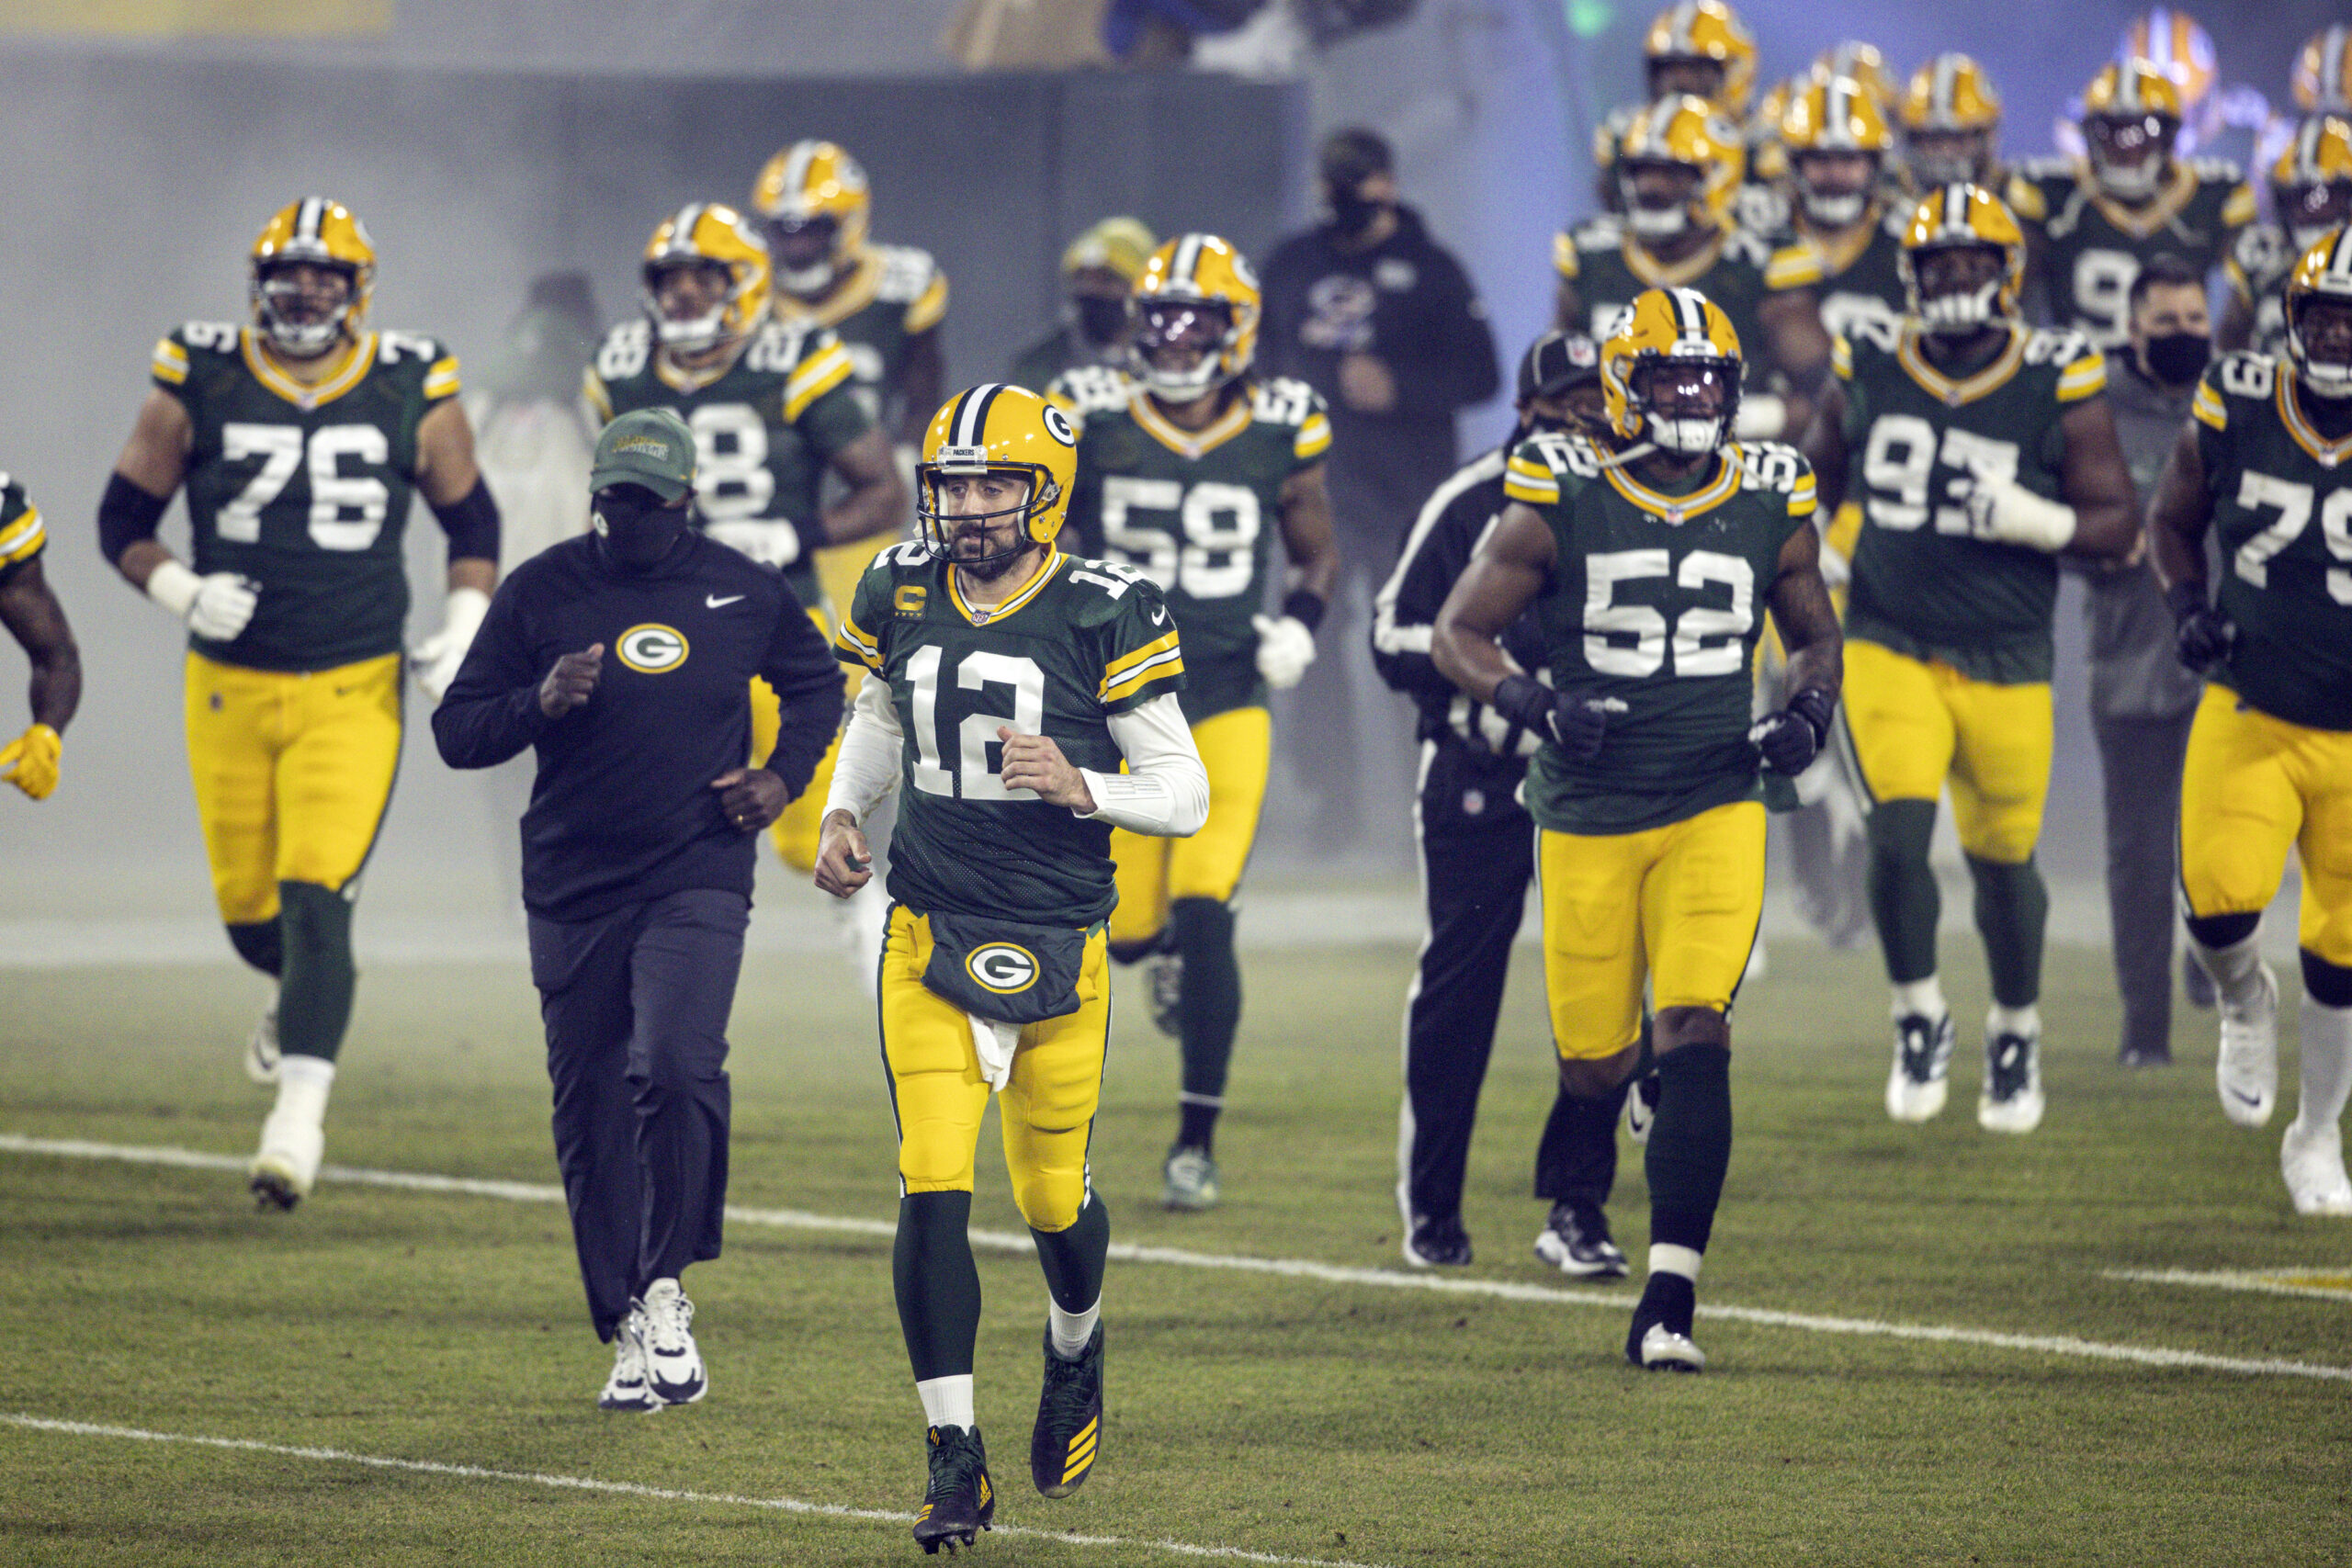 Green Bay Packers' Aaron Rodgers runs out with teammates during an NFL football game against the Carolina Panthers